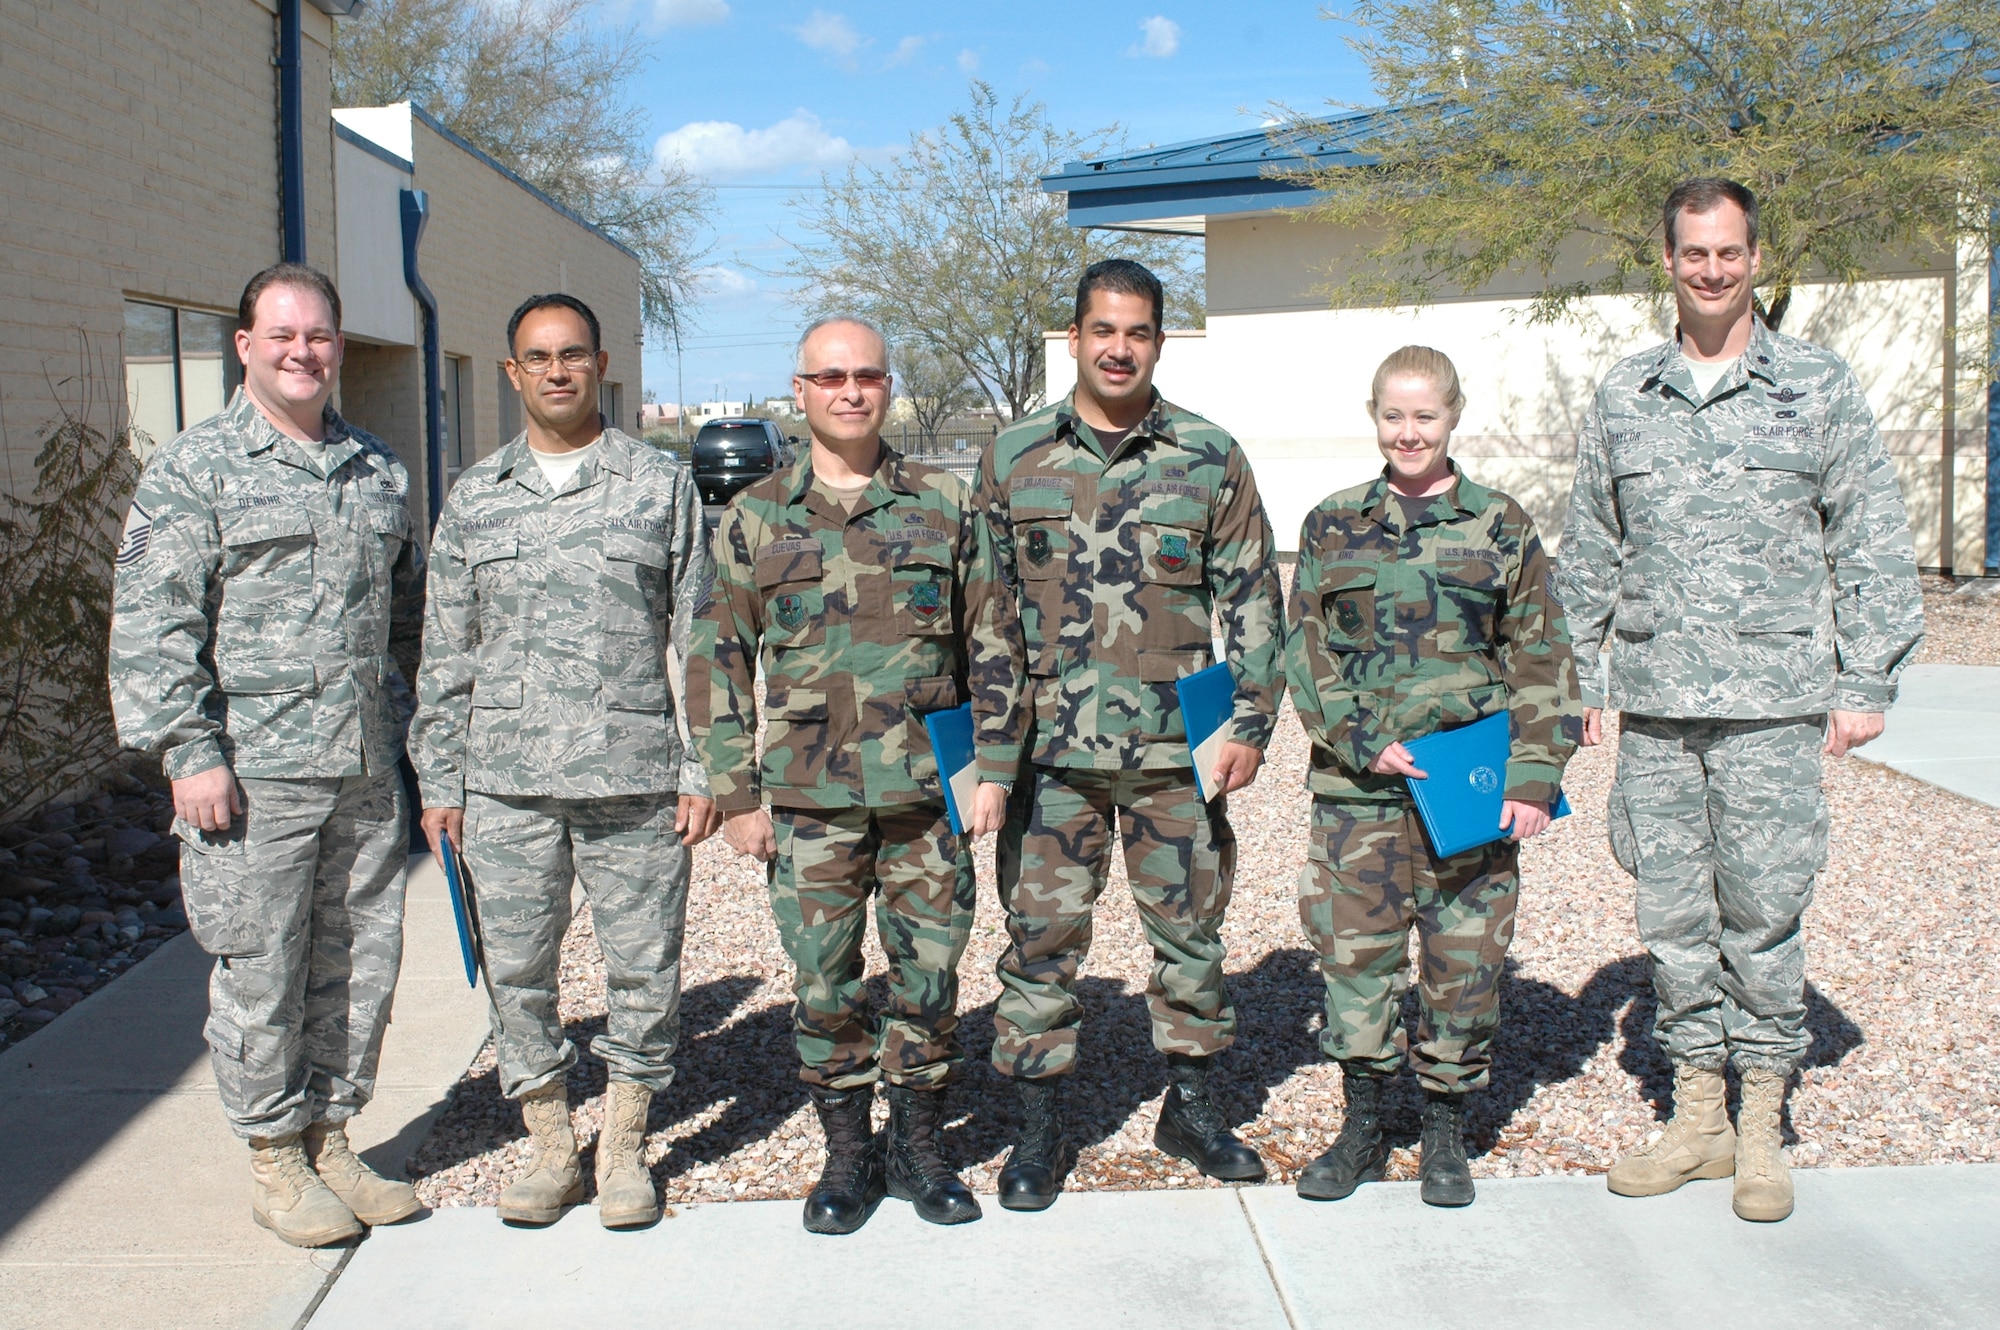 L-R:  Master Sgt. Jeffrey DeBuhr, Tech. Sgt. Fredrick Hernandez, Master Sgt. Fernando Cuevas, Staff Sgt. Saul Dojaquez, and Staff Sgt. Lena King were recognized by Lt. Col. James Taylor, (far right) as the 162nd Maintenance Group Top Performers for this quarter.  The ceremony took place Feb. 4.
(Air Force photo by Maj. Gabe Johnson)